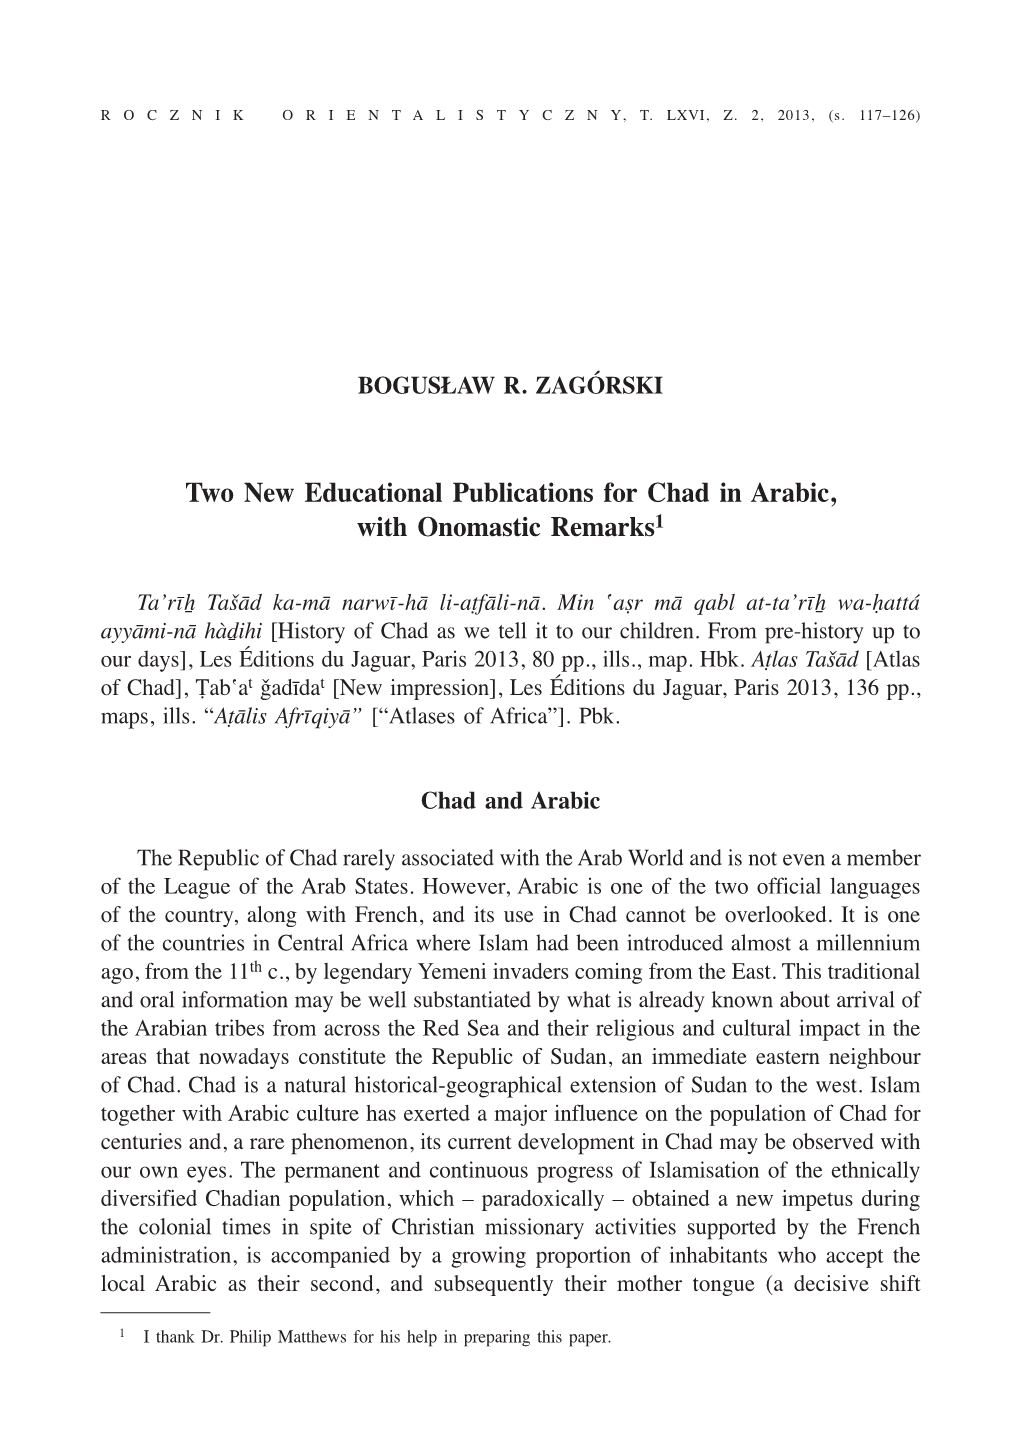 Two New Educational Publications for Chad in Arabic, with Onomastic Remarks1